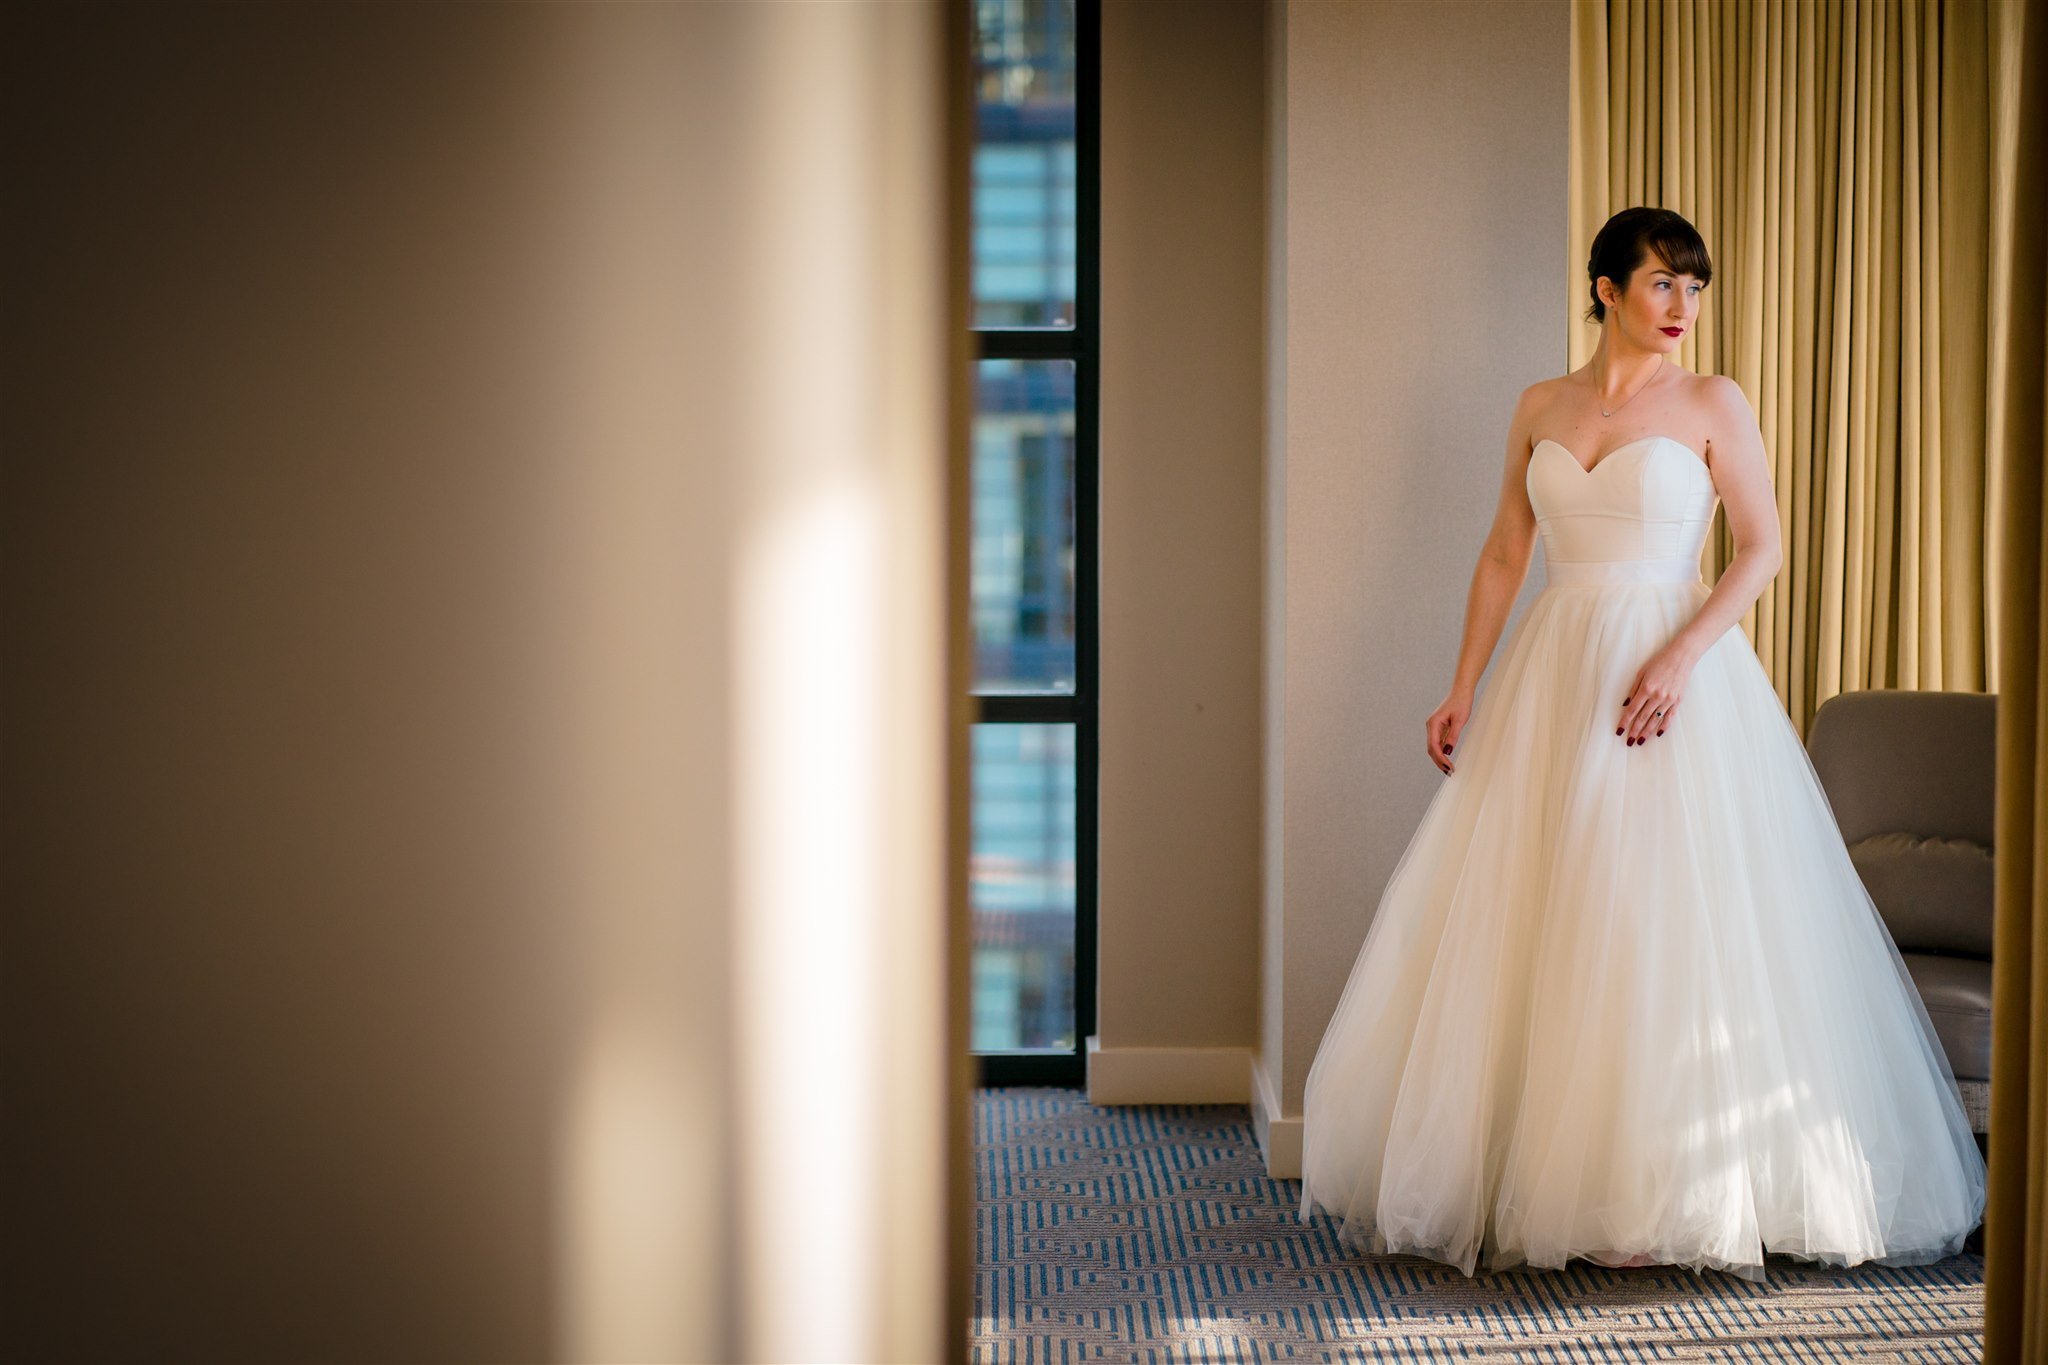 A054-Bride-Pre-Ceremony-Intercontinental-at-the-Wharf-DC-Wedding-Photography-by-Bee-Two-Sweet.jpg